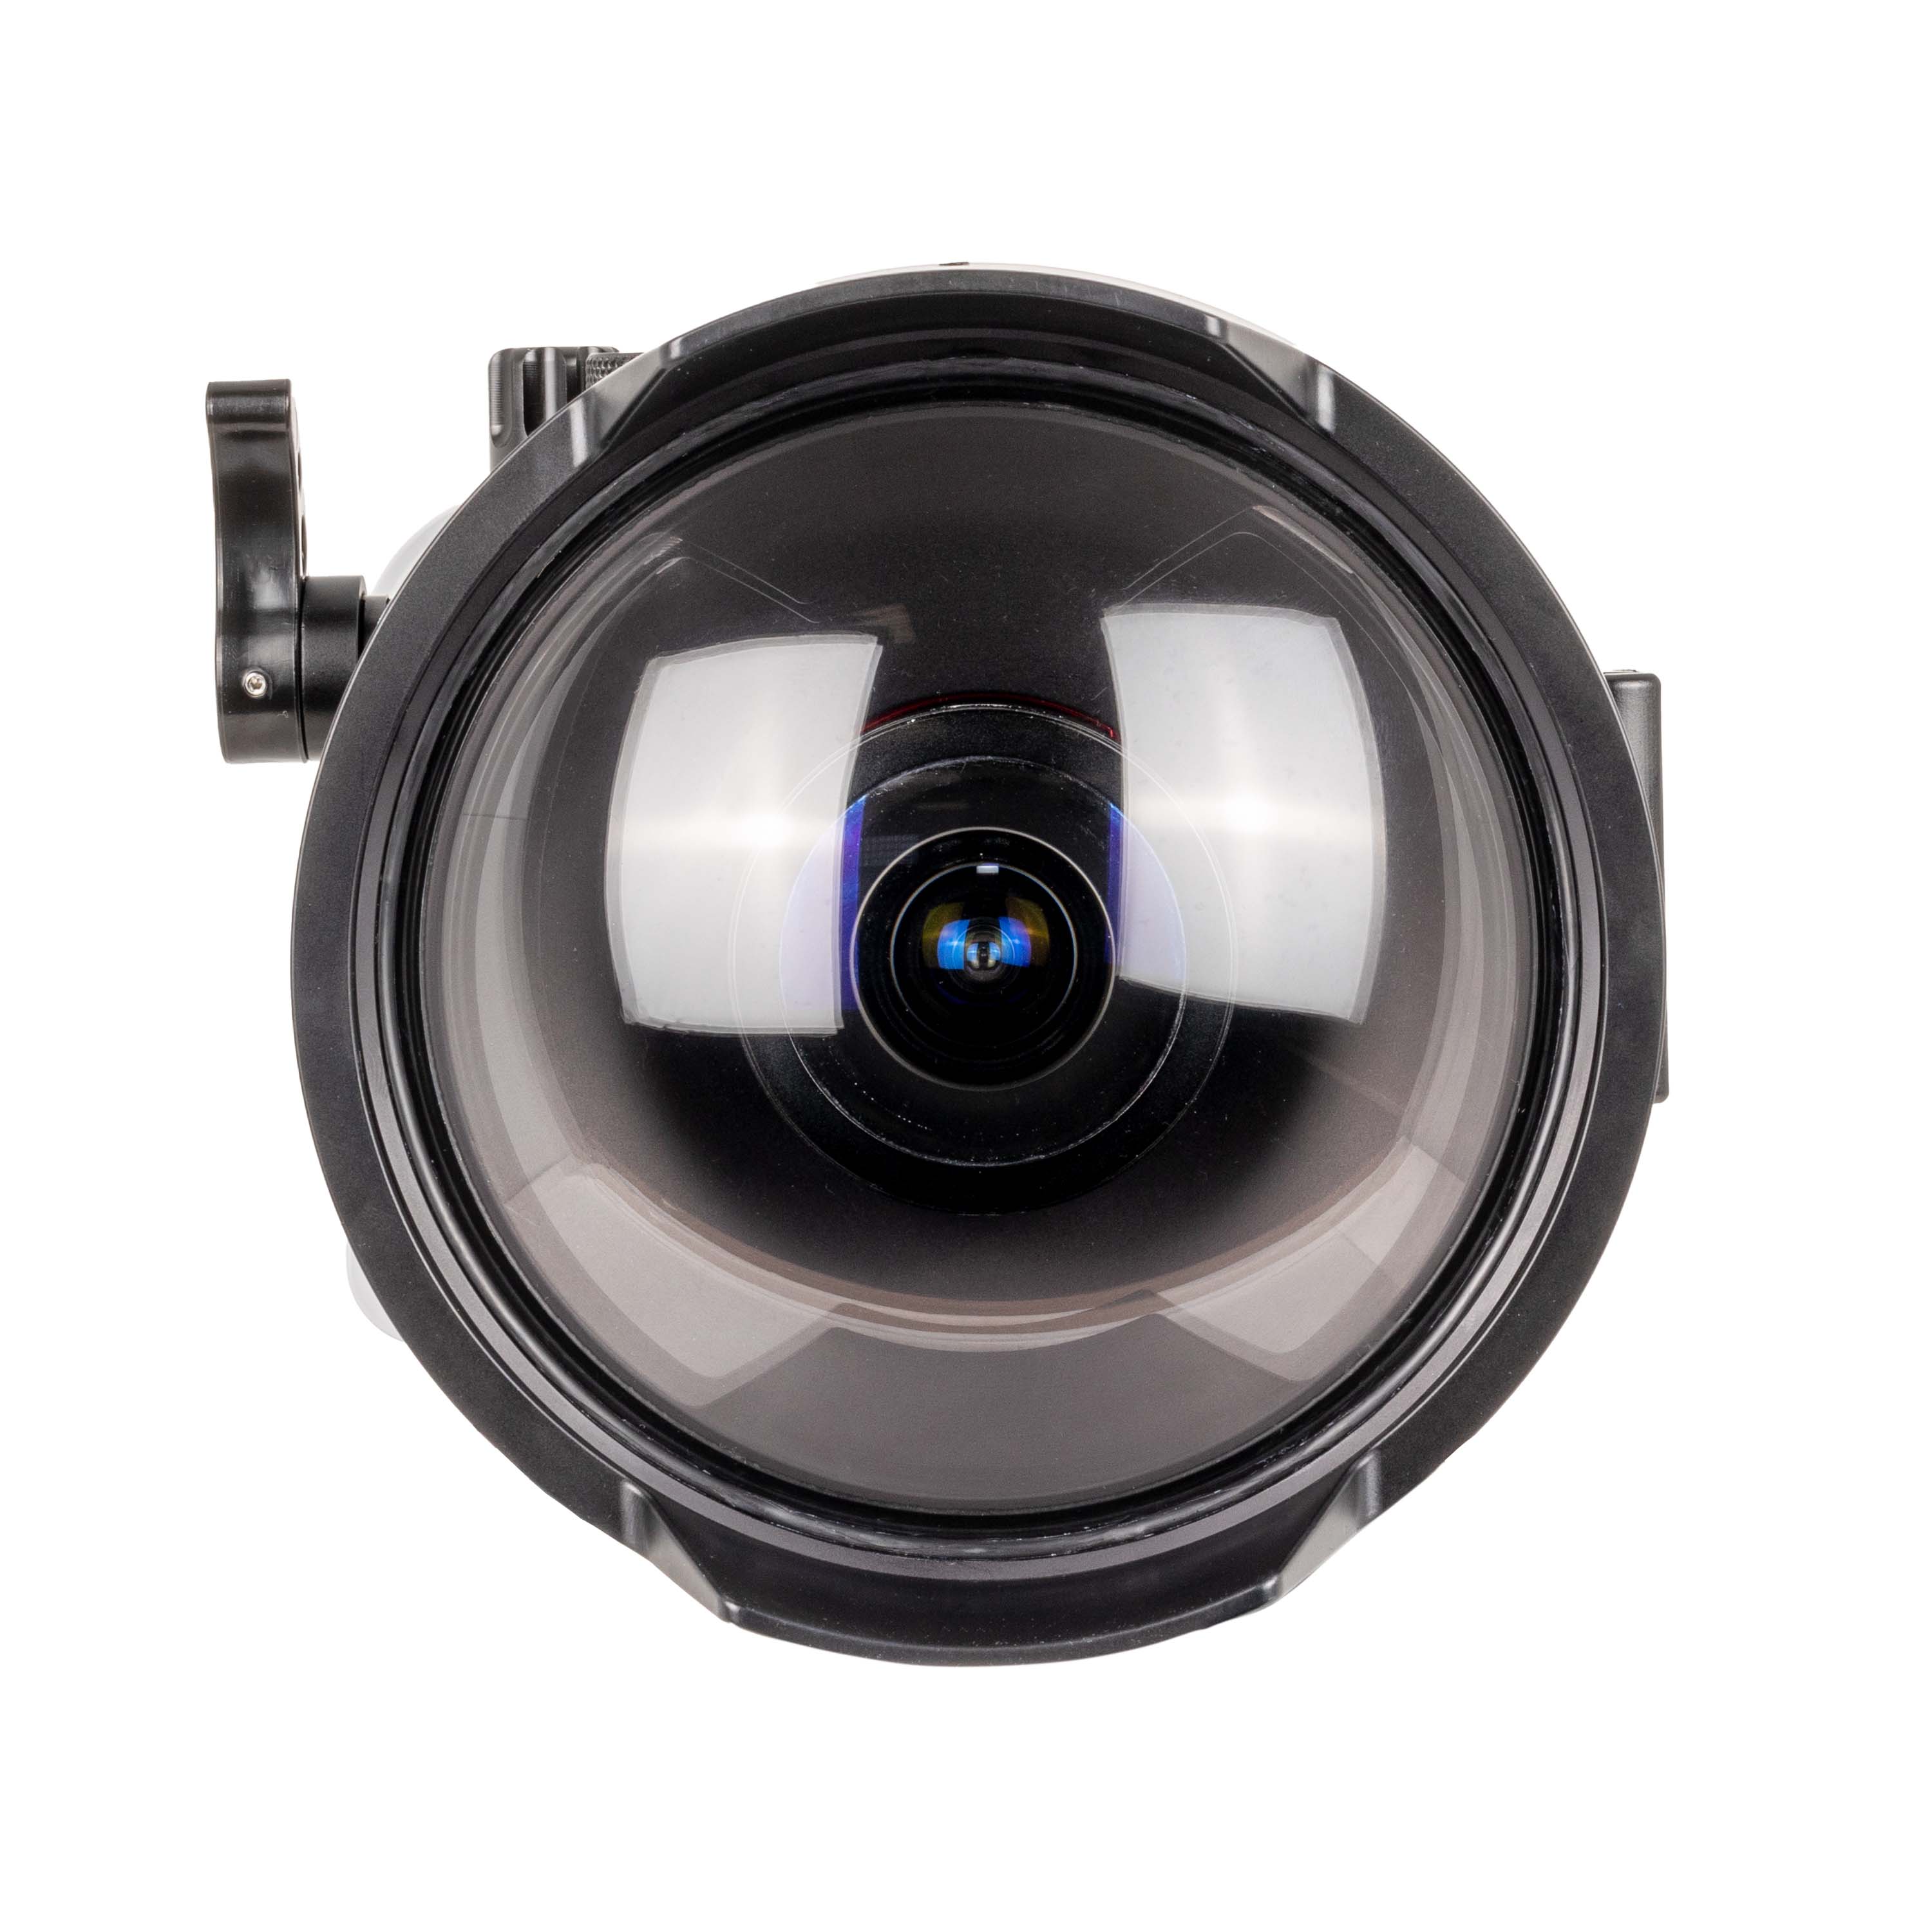 Ikelite Underwater Housing for OM System TG-7, Olympus Tough TG-6 with Dome Port for FCON-T02 Fisheye